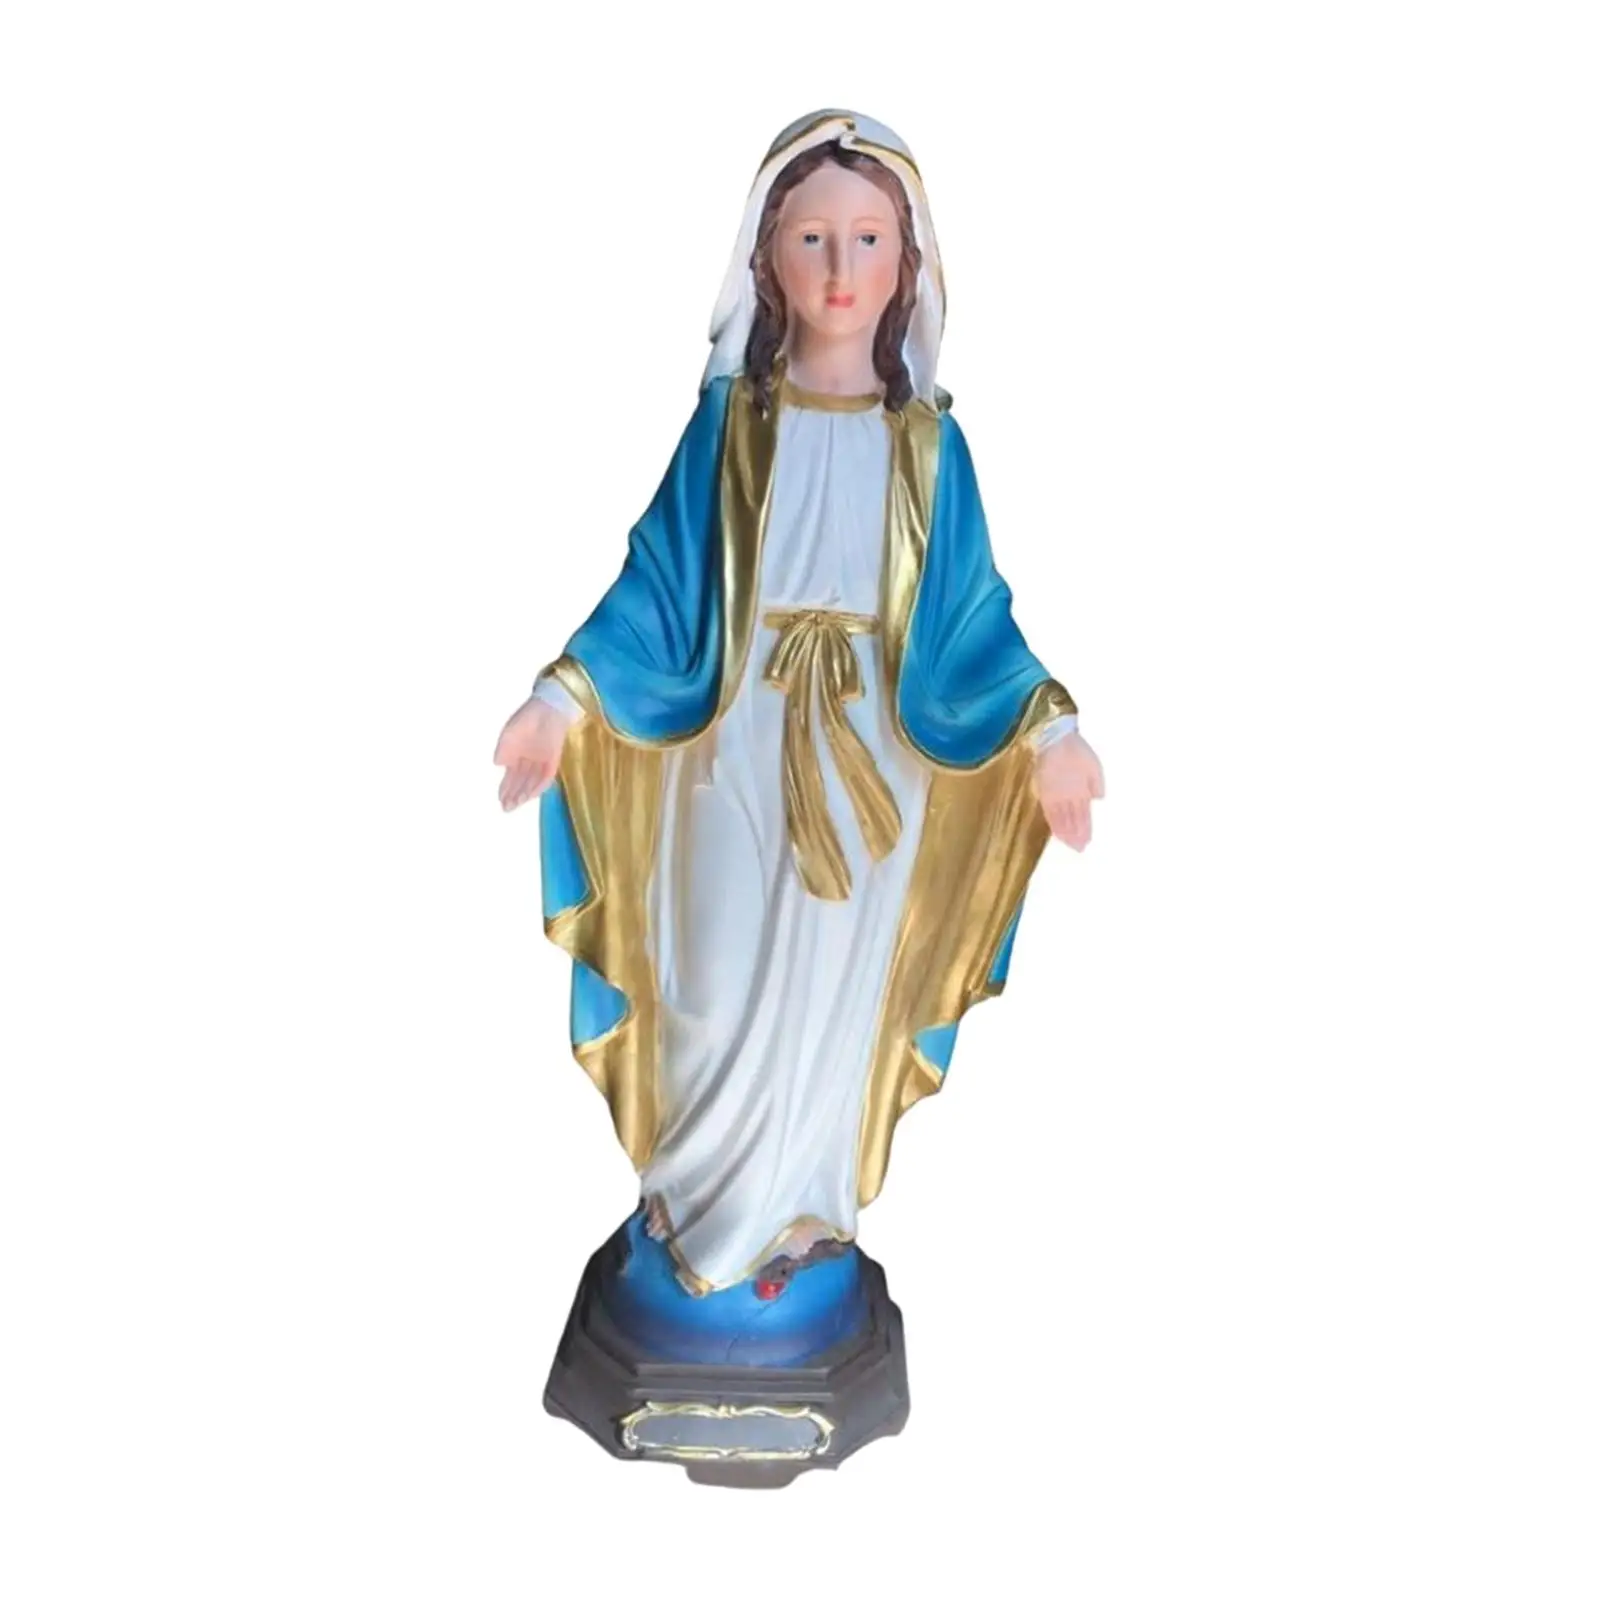 Holy Mother Mary Figurine Wedding Gift Dining Room Standing Statue Decorative Stable